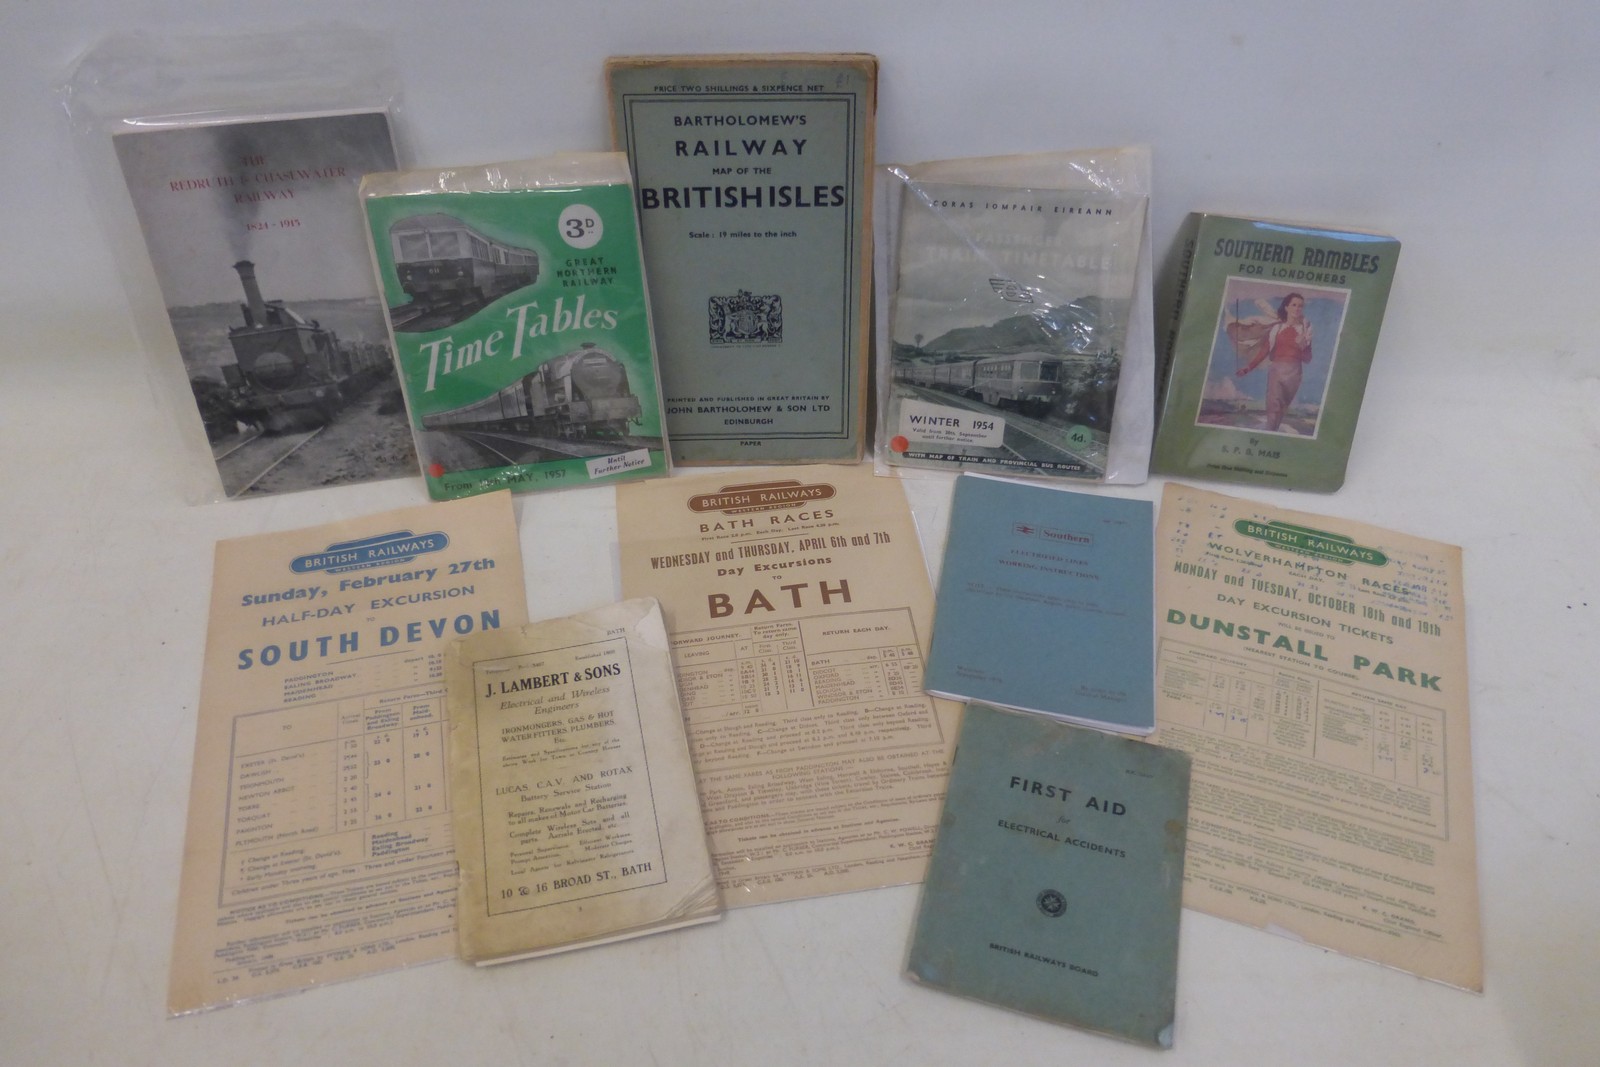 A selection of railway ephemera including 'Southern Rambles for Londoners', British Railways